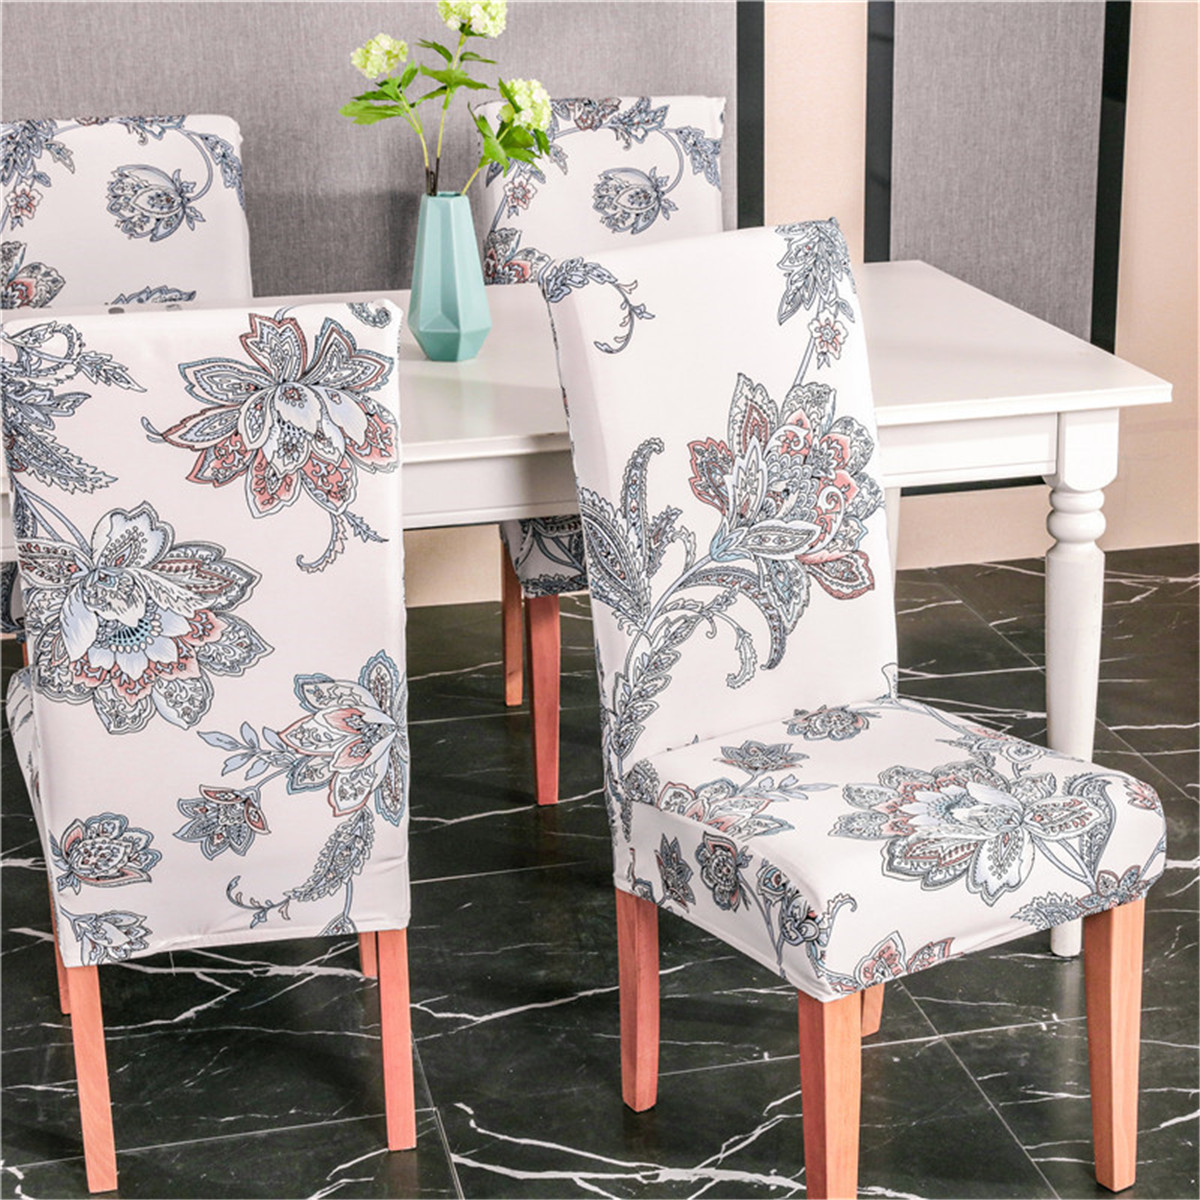 1//2//4//6X Dining Chair Seat Covers Slip Stretch Wedding Banquet Dining Room Grey